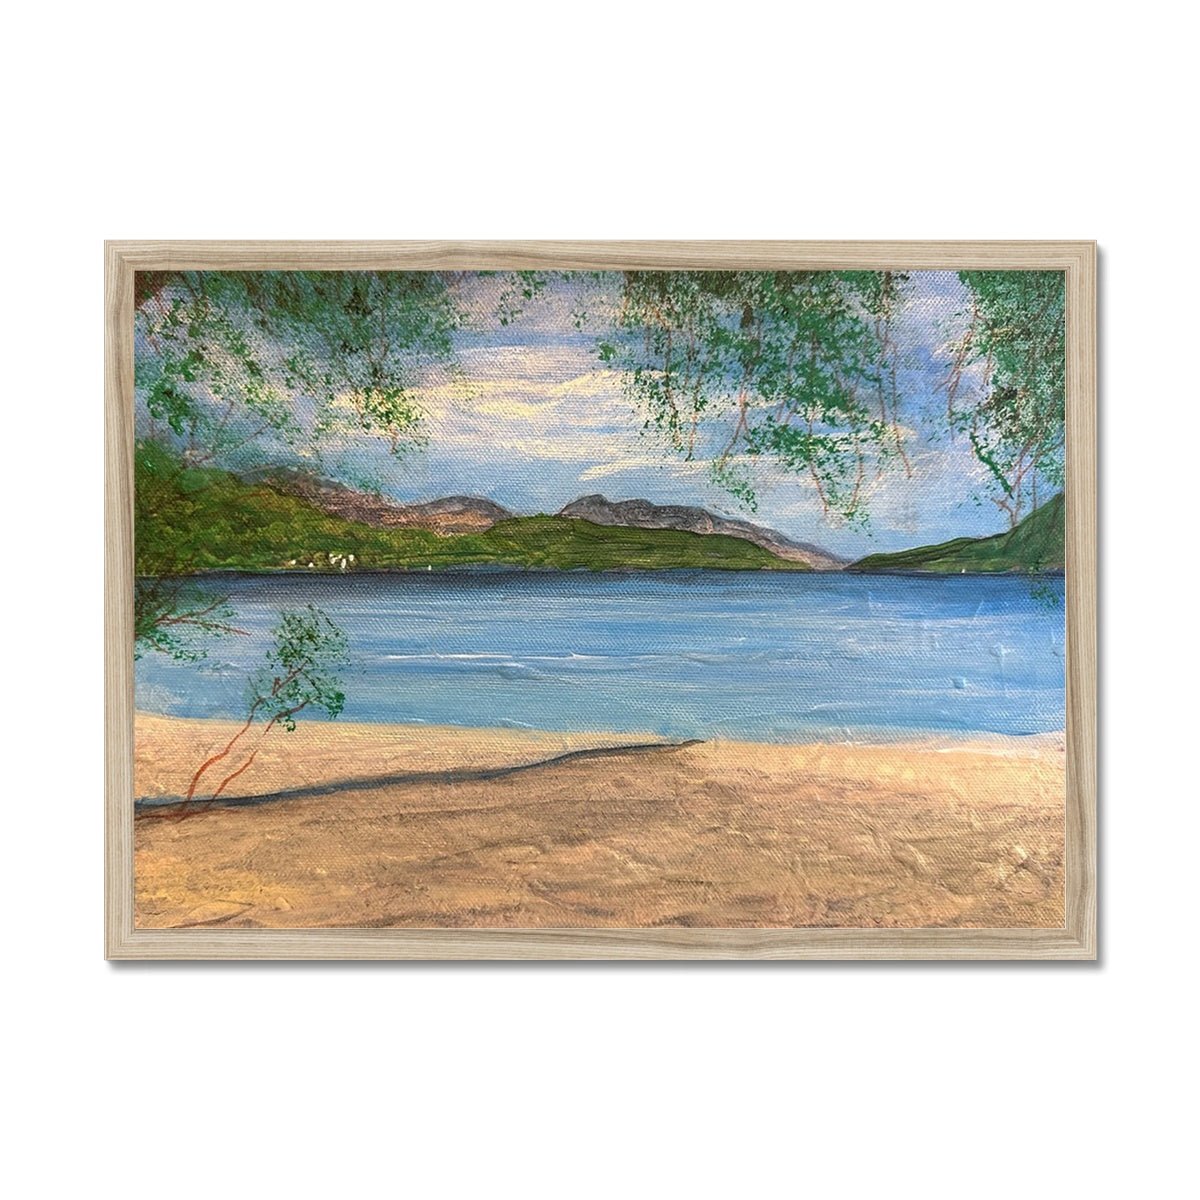 Firkin Point Loch Lomond Painting | Framed Prints From Scotland-Framed Prints-Scottish Lochs & Mountains Art Gallery-A2 Landscape-Natural Frame-Paintings, Prints, Homeware, Art Gifts From Scotland By Scottish Artist Kevin Hunter